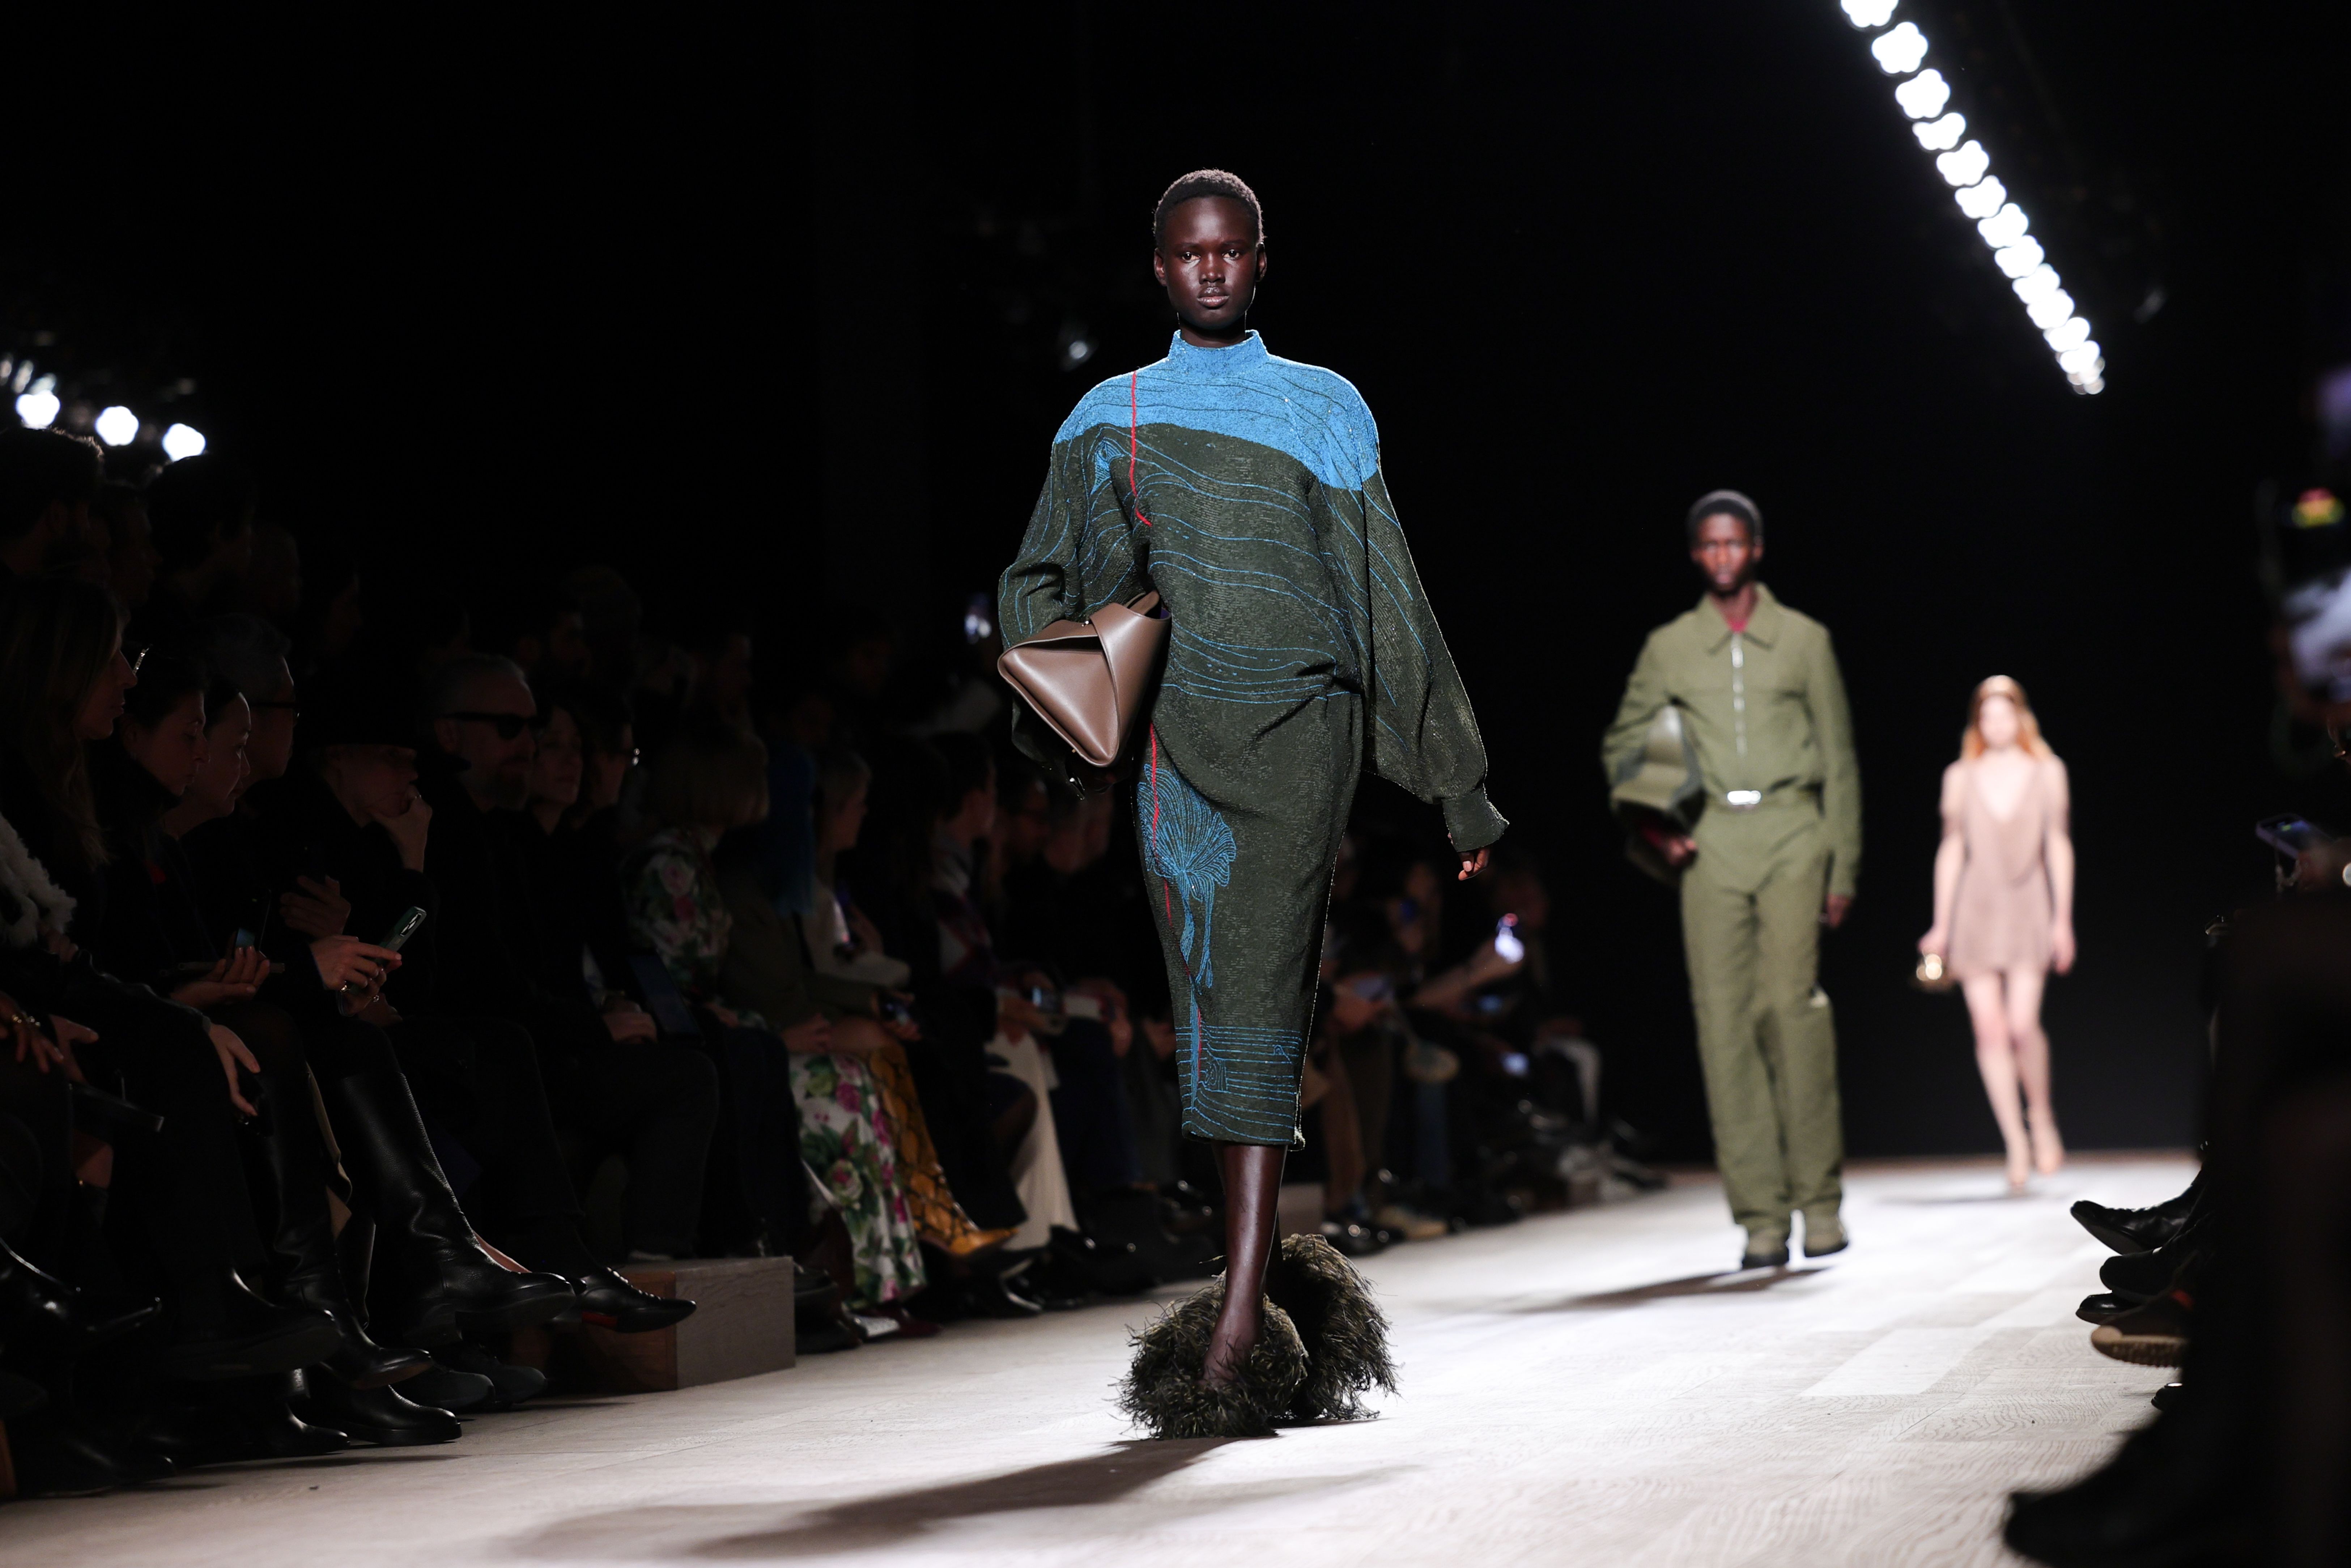 A deep mossy khaki color was prevalent on several runways including Ferragamo, above.